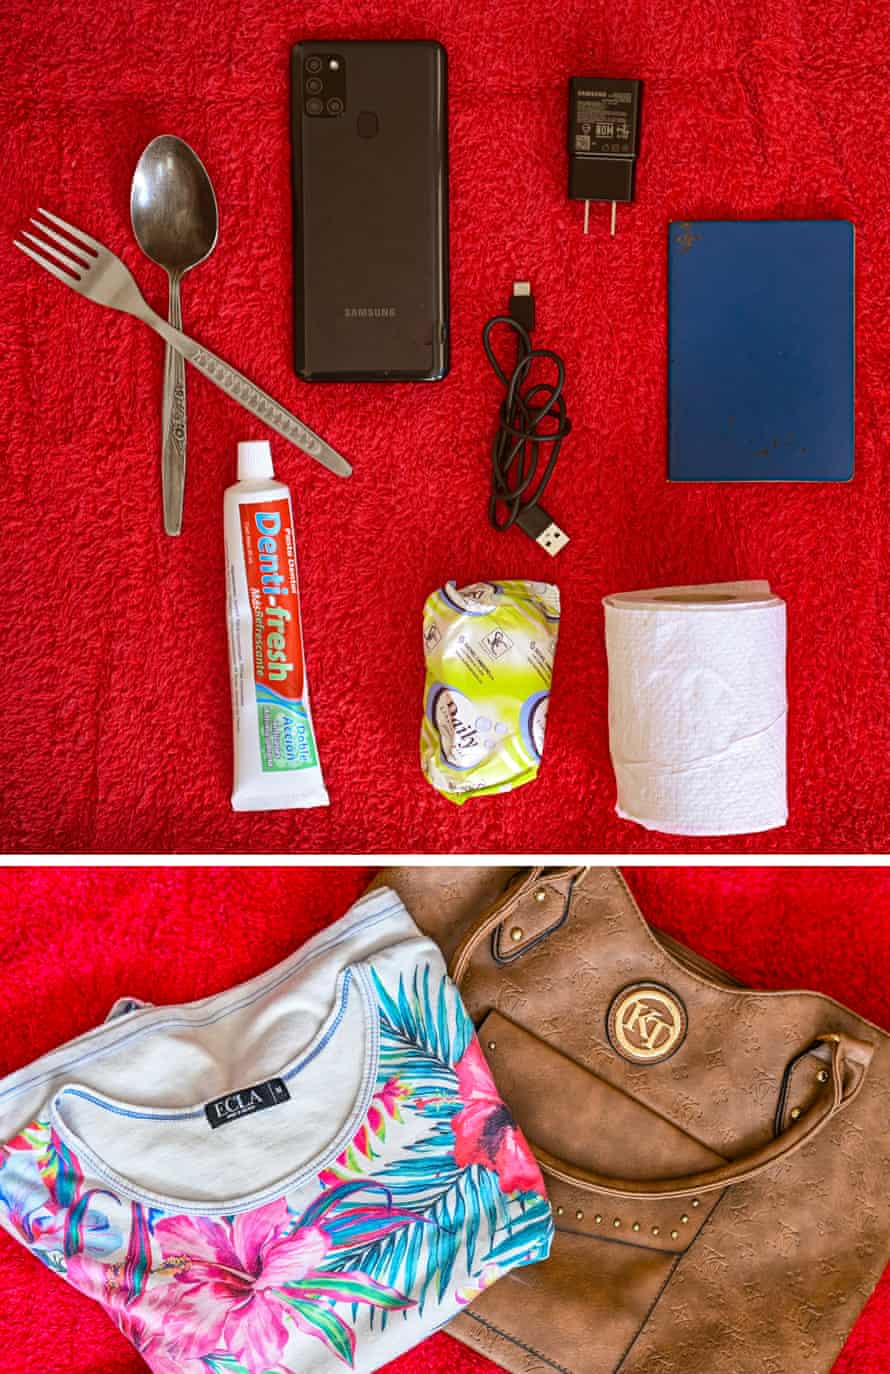 Each of Mir Marrero’s bag contain the same basic item, including toothbrush and toothpaste, underwear, and deodorant.